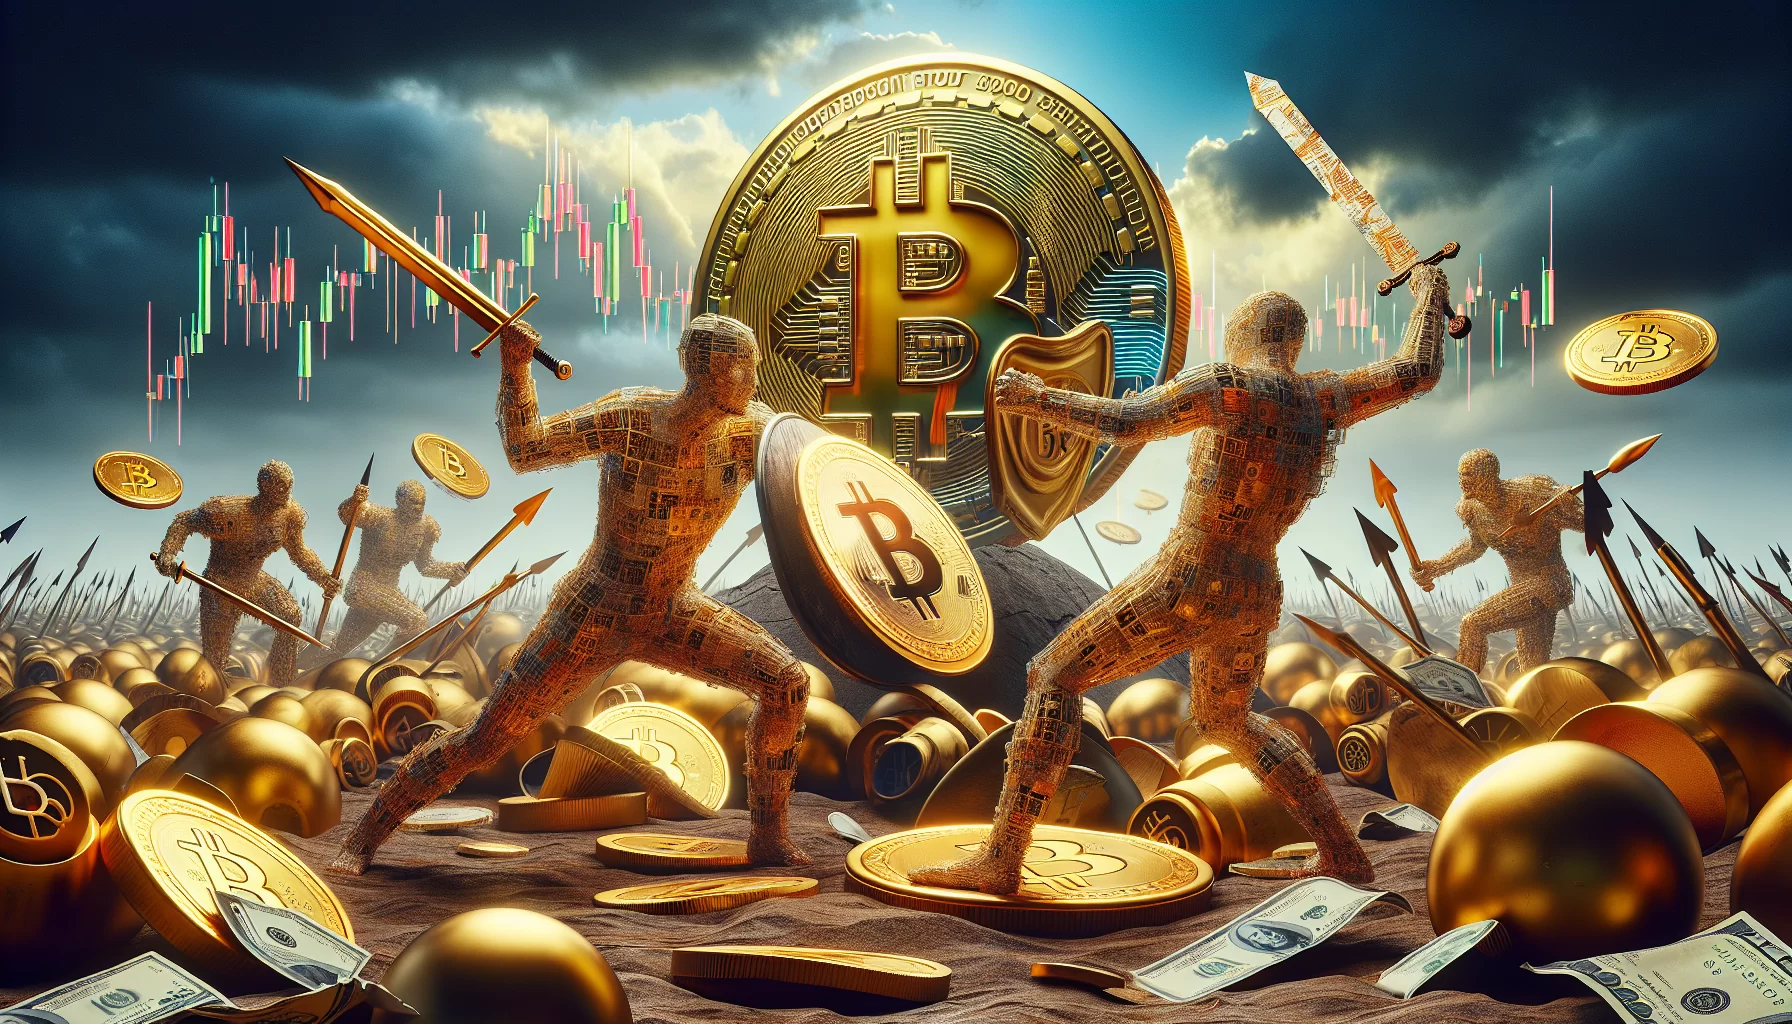 Bitcoin's battle navigating the crucial 100,000 dollars resistance level